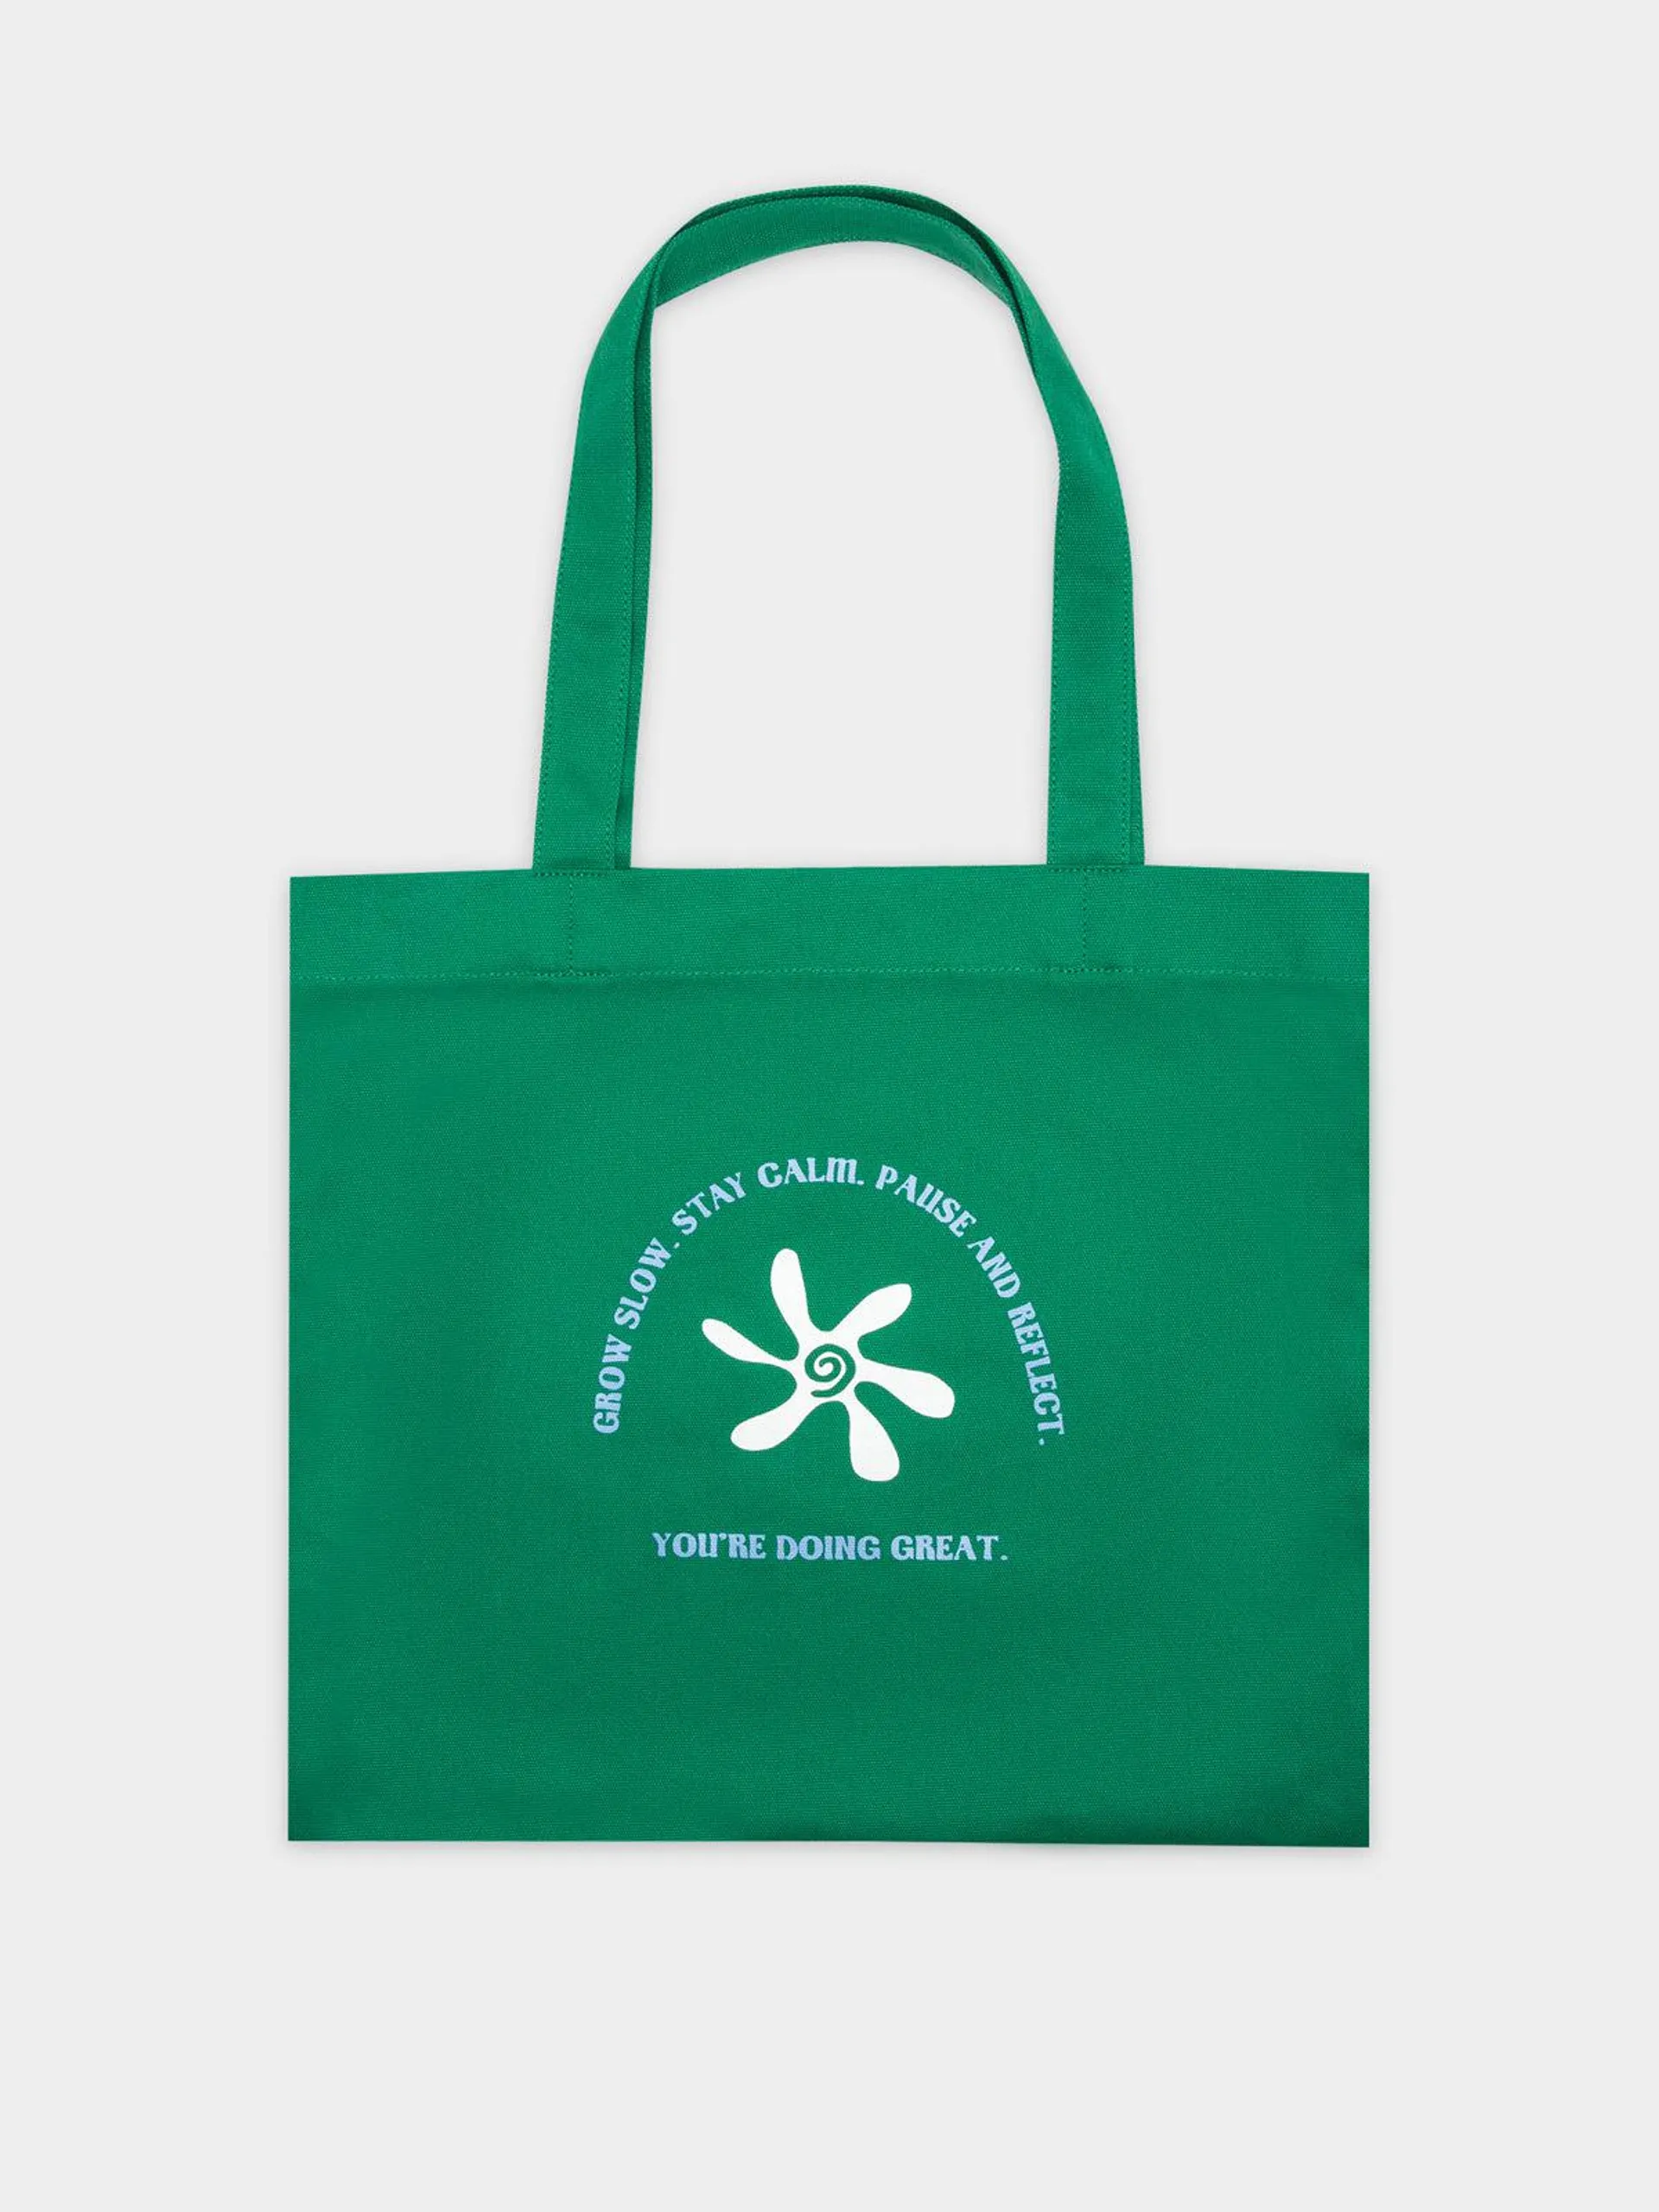 Stay Calm Tote Bag in Bottle Green